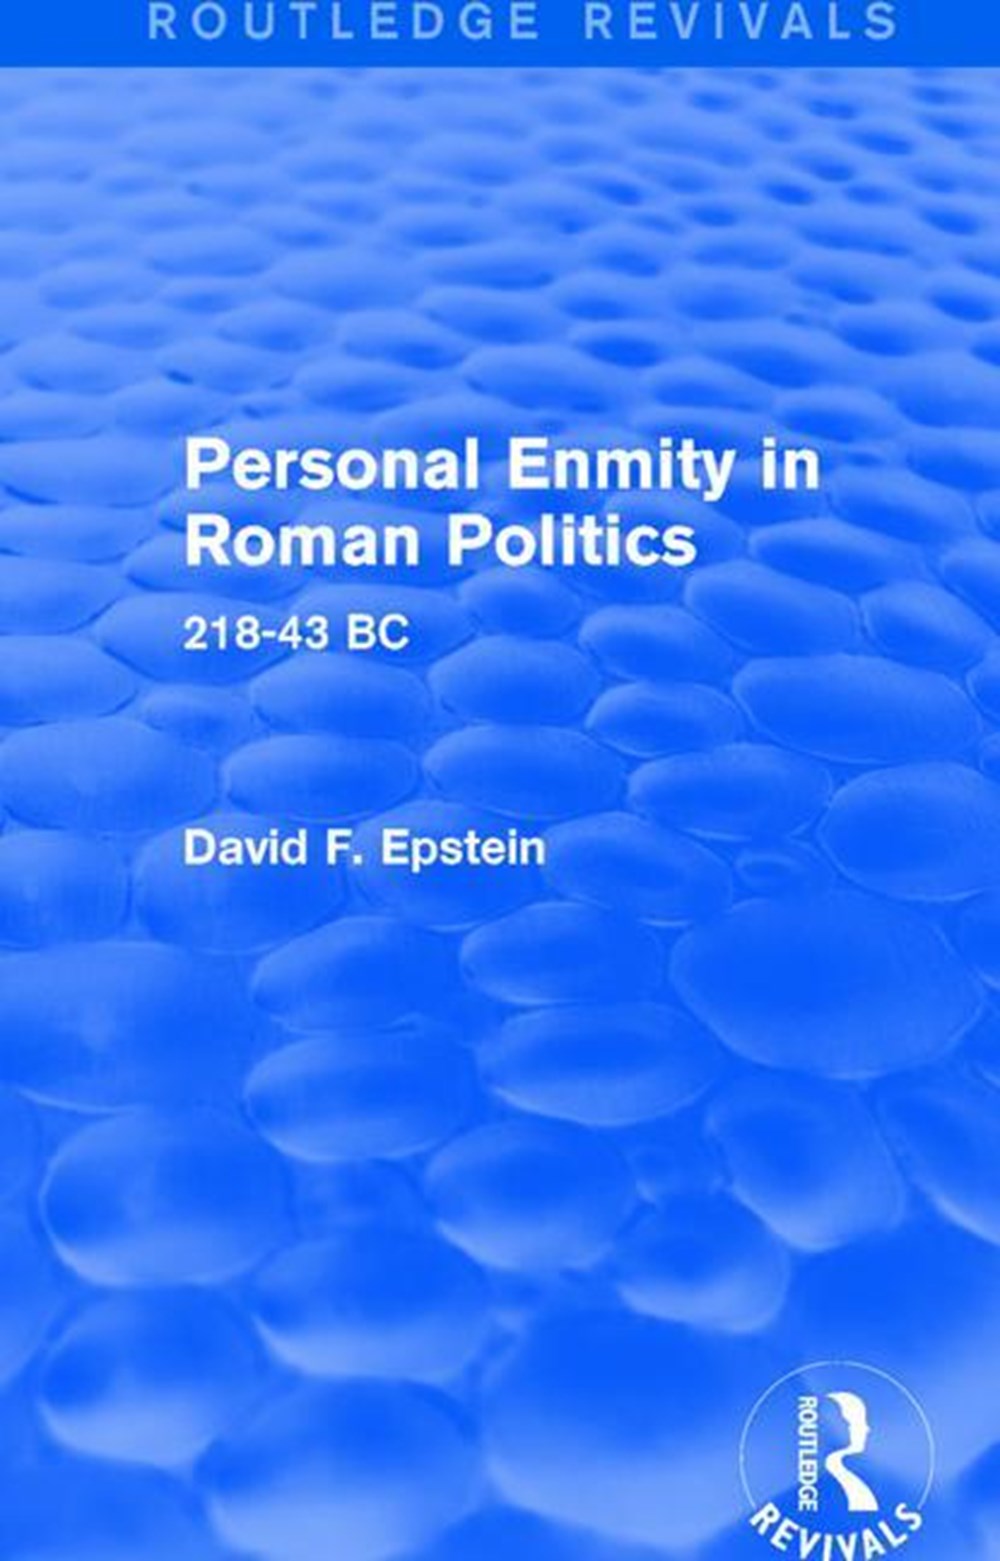 Personal Enmity in Roman Politics (Routledge Revivals) 218-43 BC